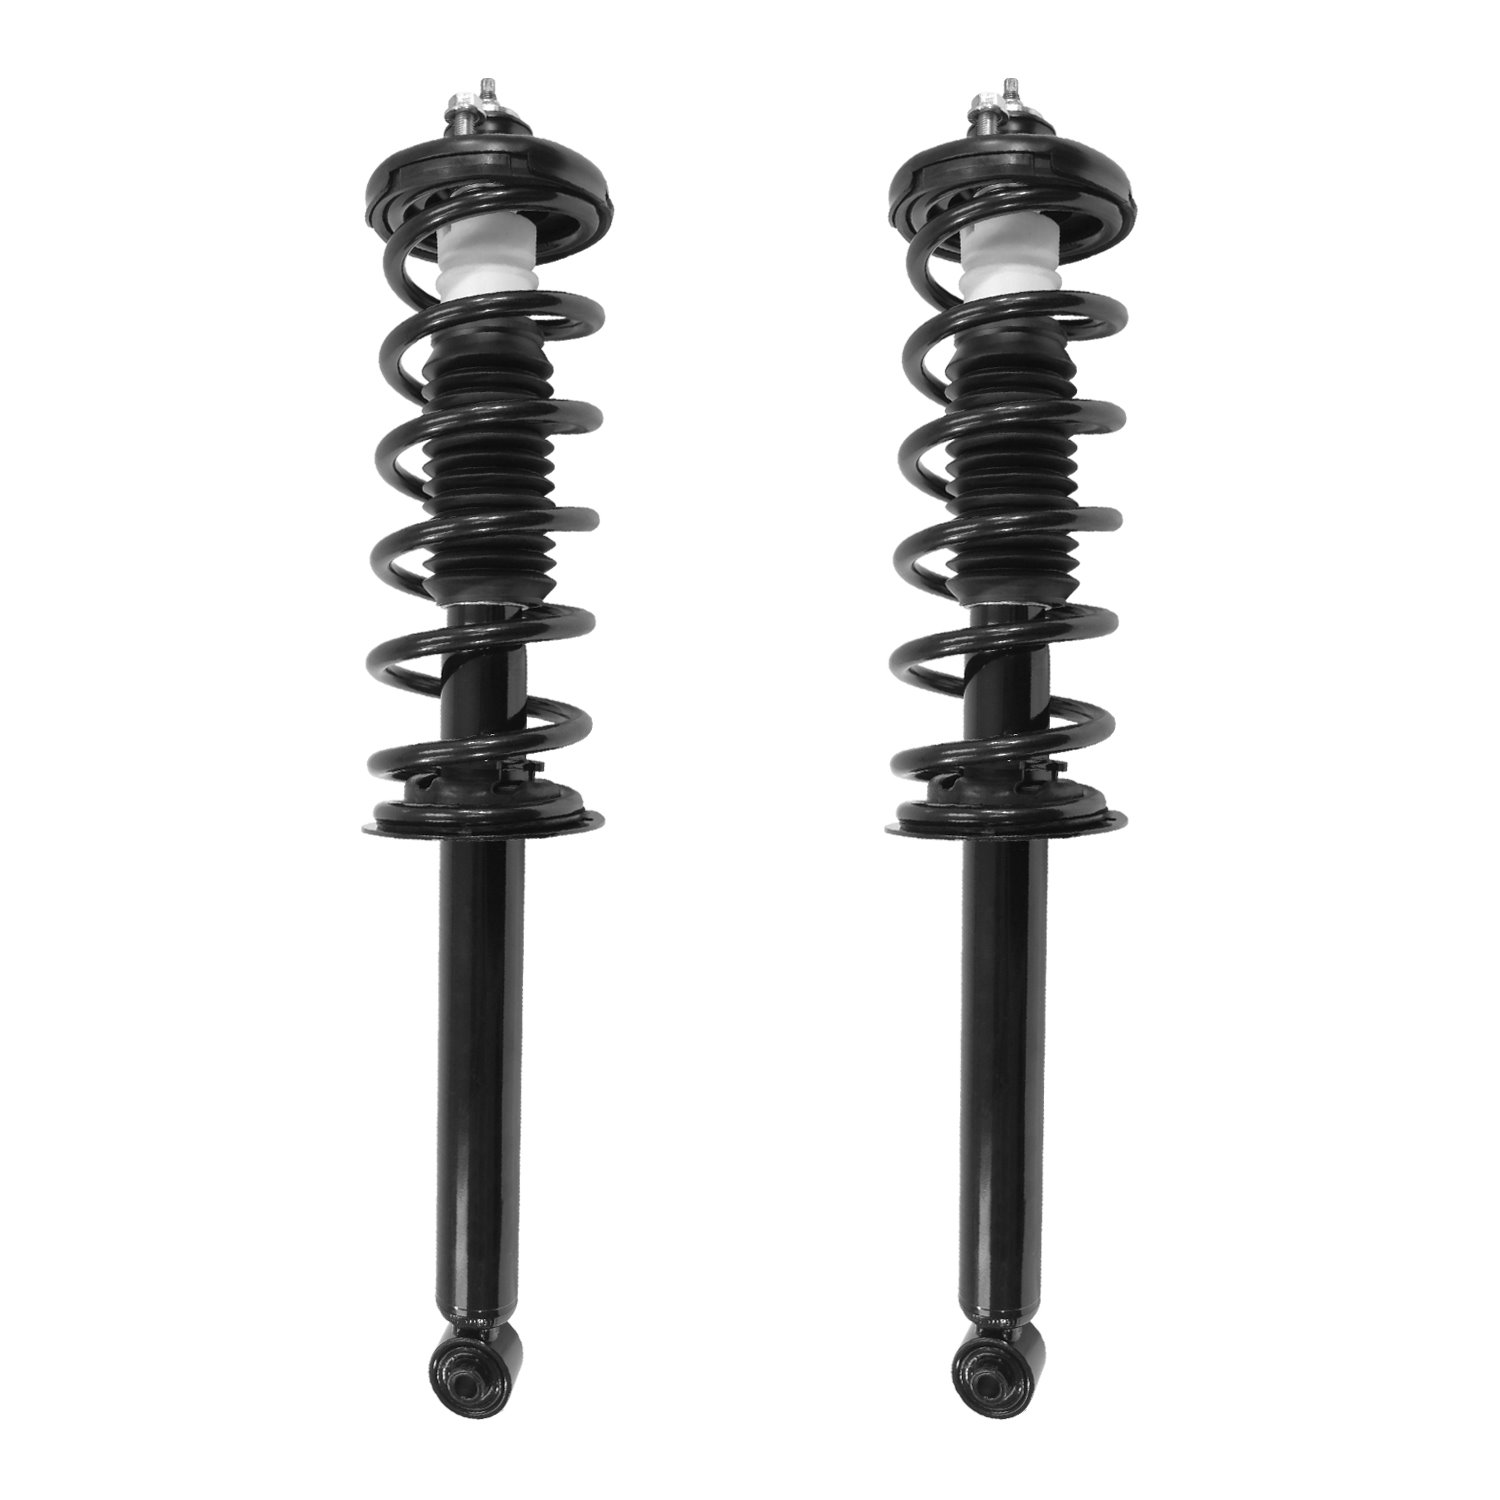 2-16040-001 Suspension Strut & Coil Spring Assembly Set Fits Select Acura TSX